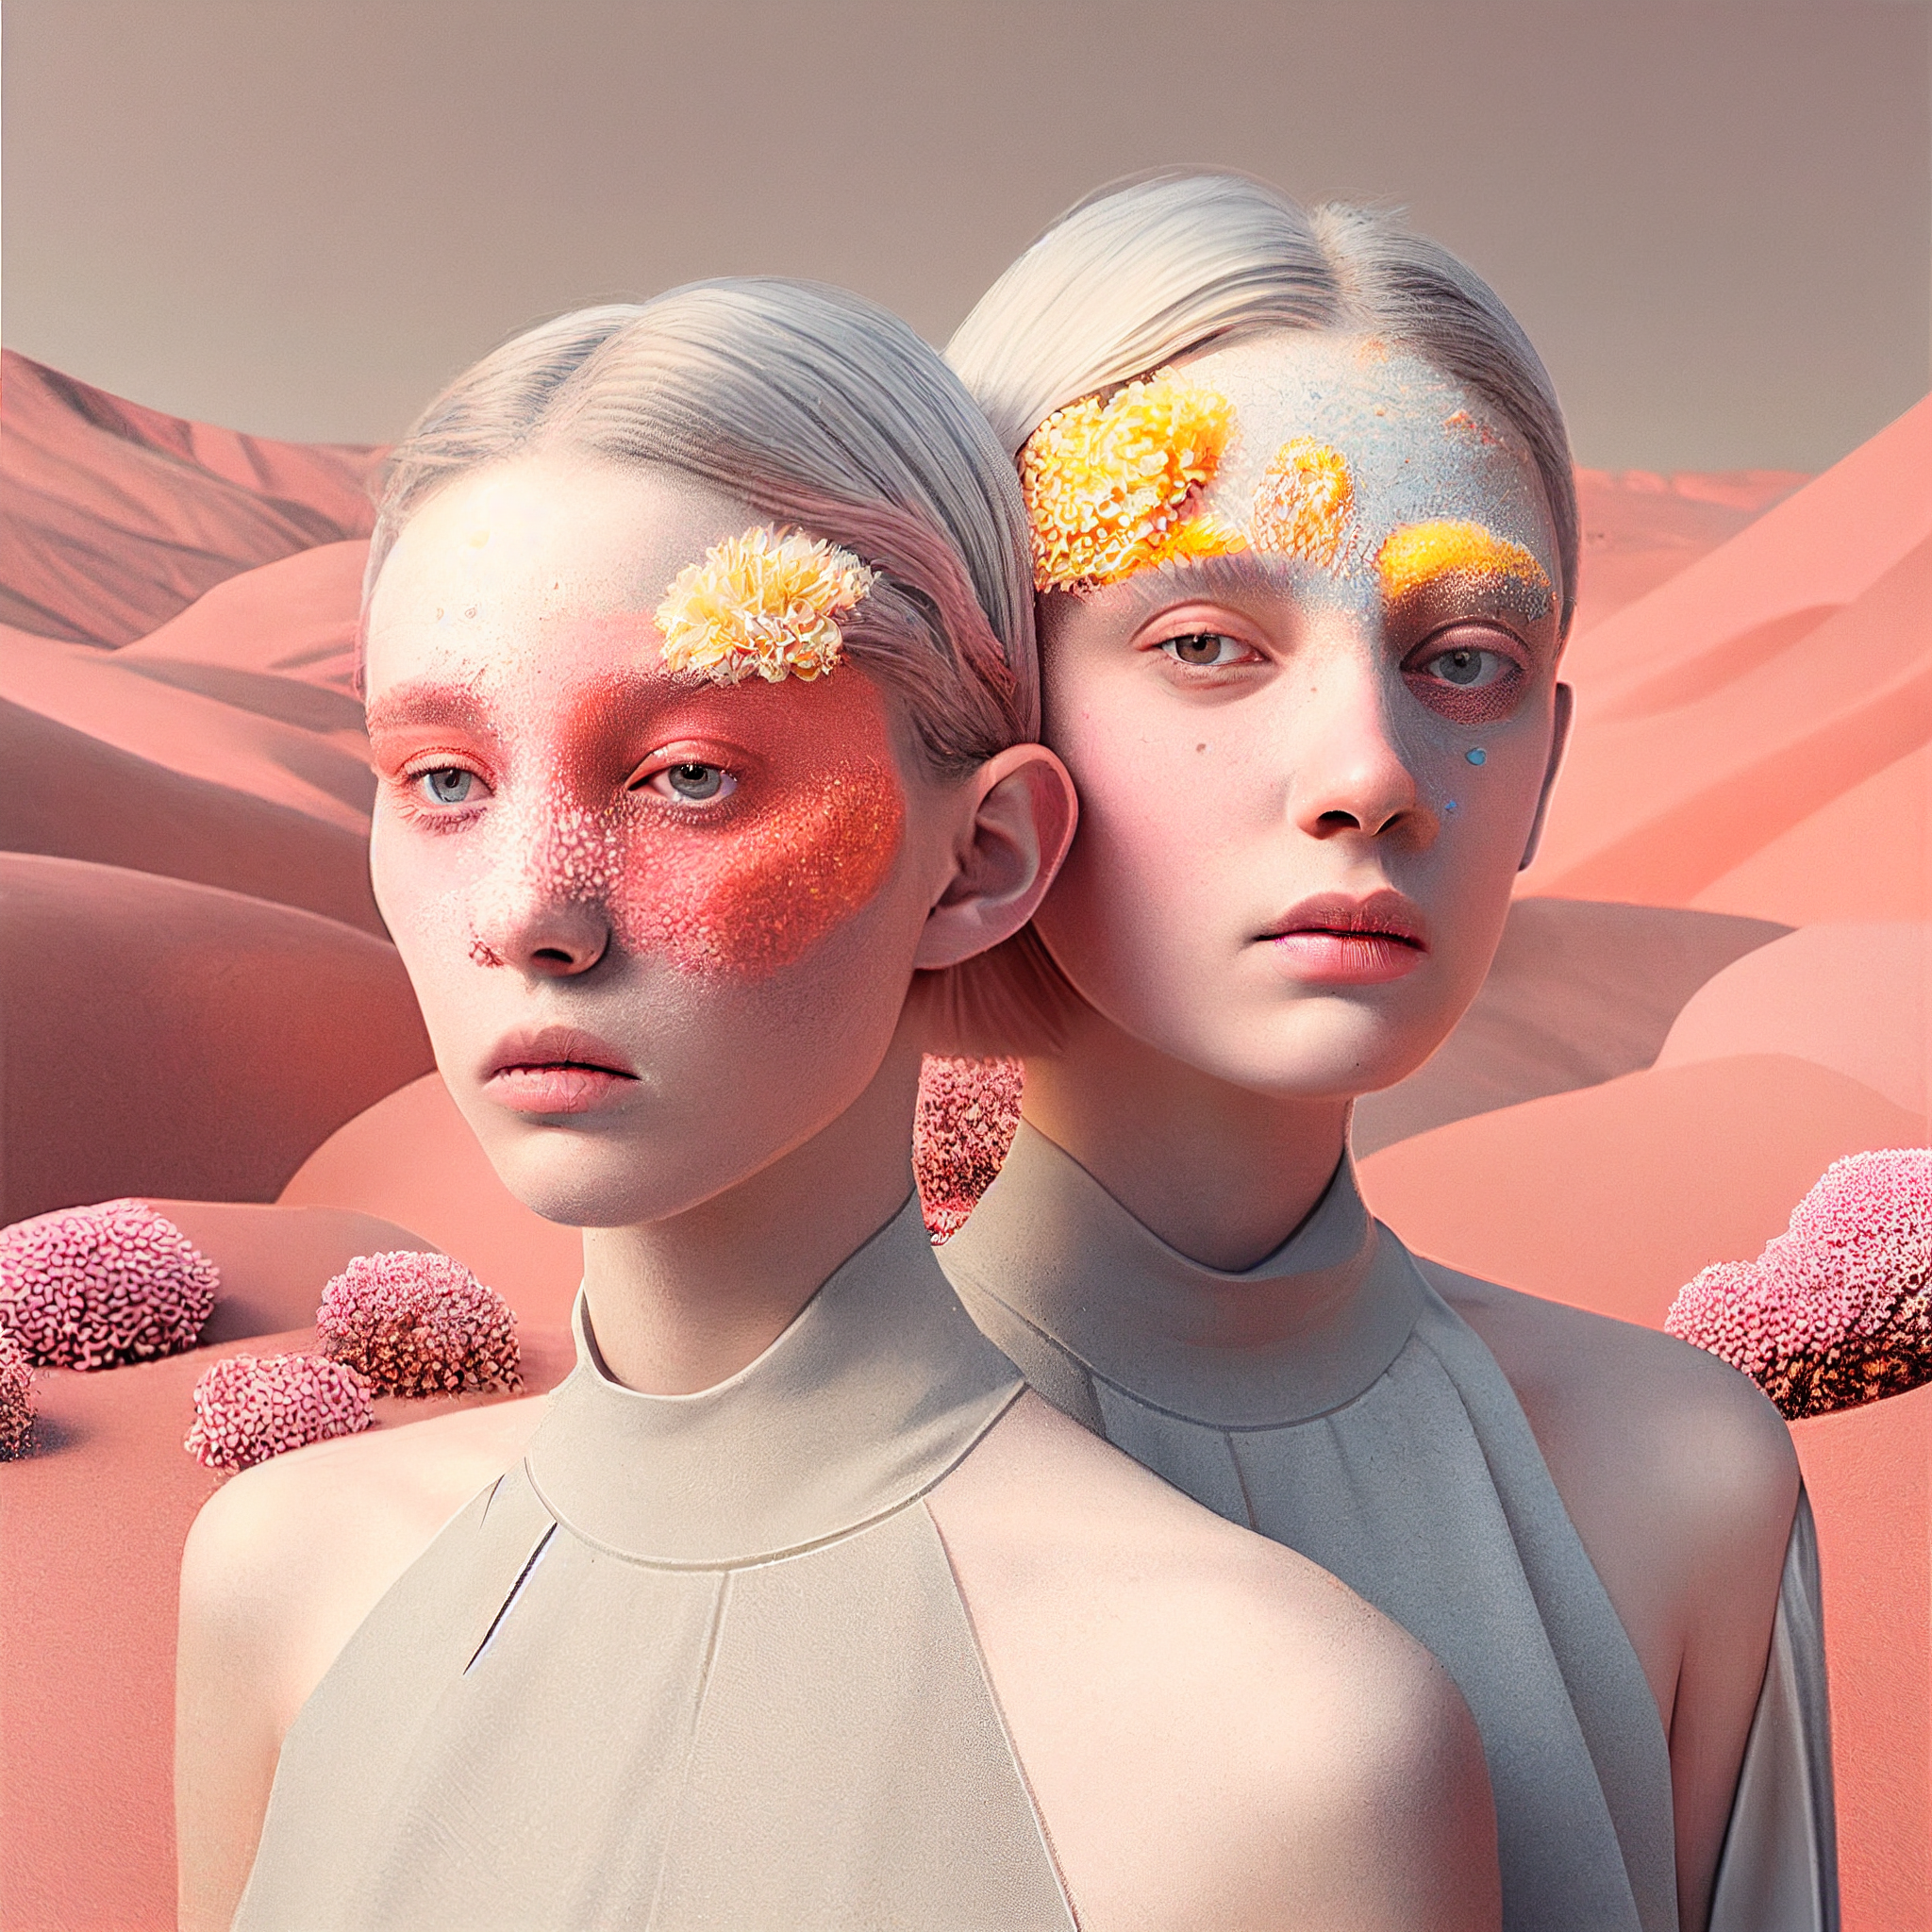 sines_gorgeous_surreal_ethereal_Olivia_Locher_and_Erik_Ma_776699d8-4fdf-45d0-aaab-bc4e45cedfd9